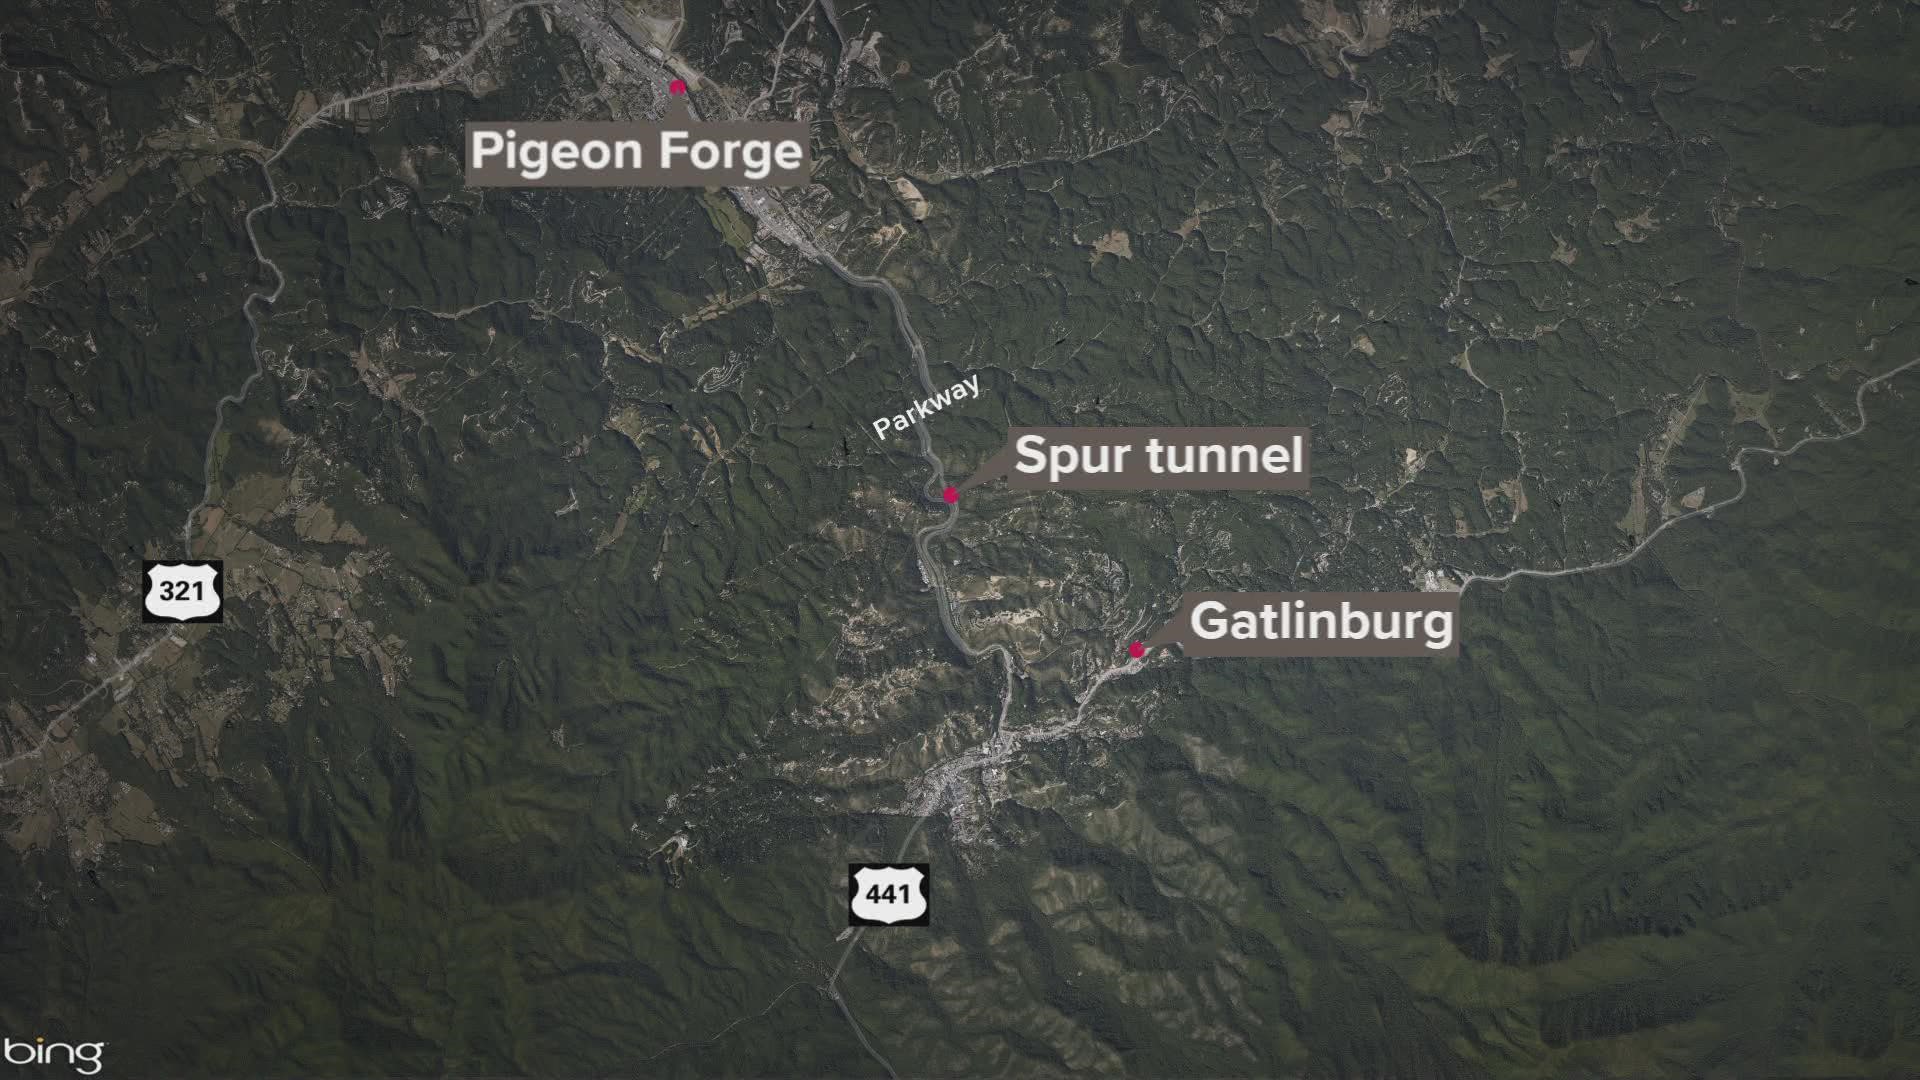 The Great Smoky Mountains said the northbound  Spur tunnel will be reduced to one lane on Jan. 3 through April 7, 2023.